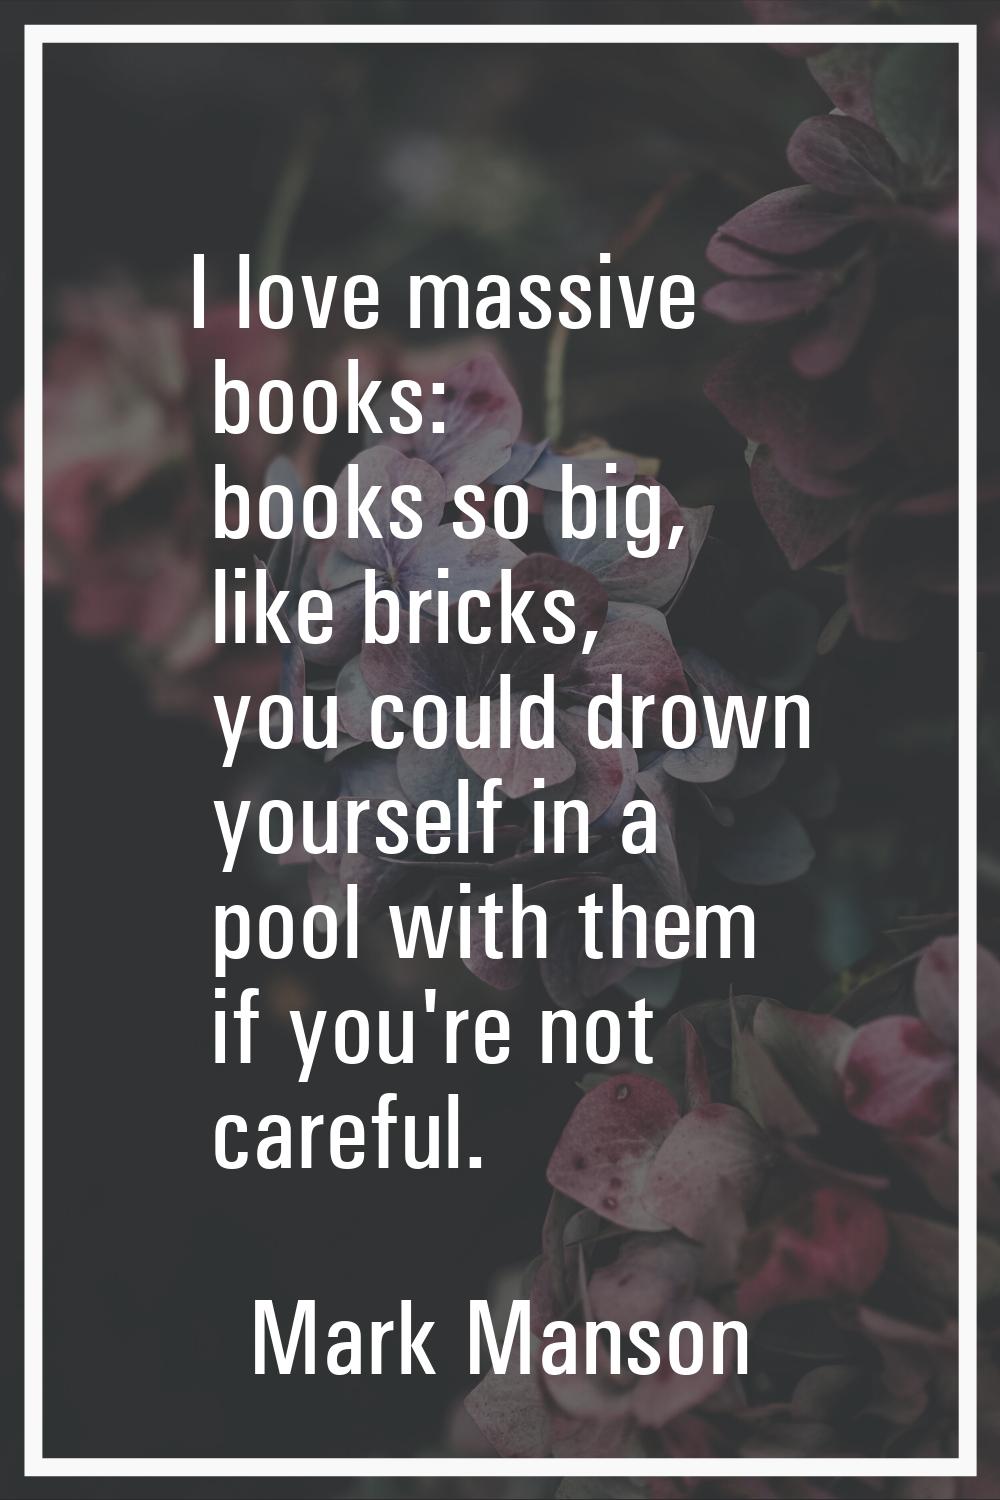 I love massive books: books so big, like bricks, you could drown yourself in a pool with them if yo